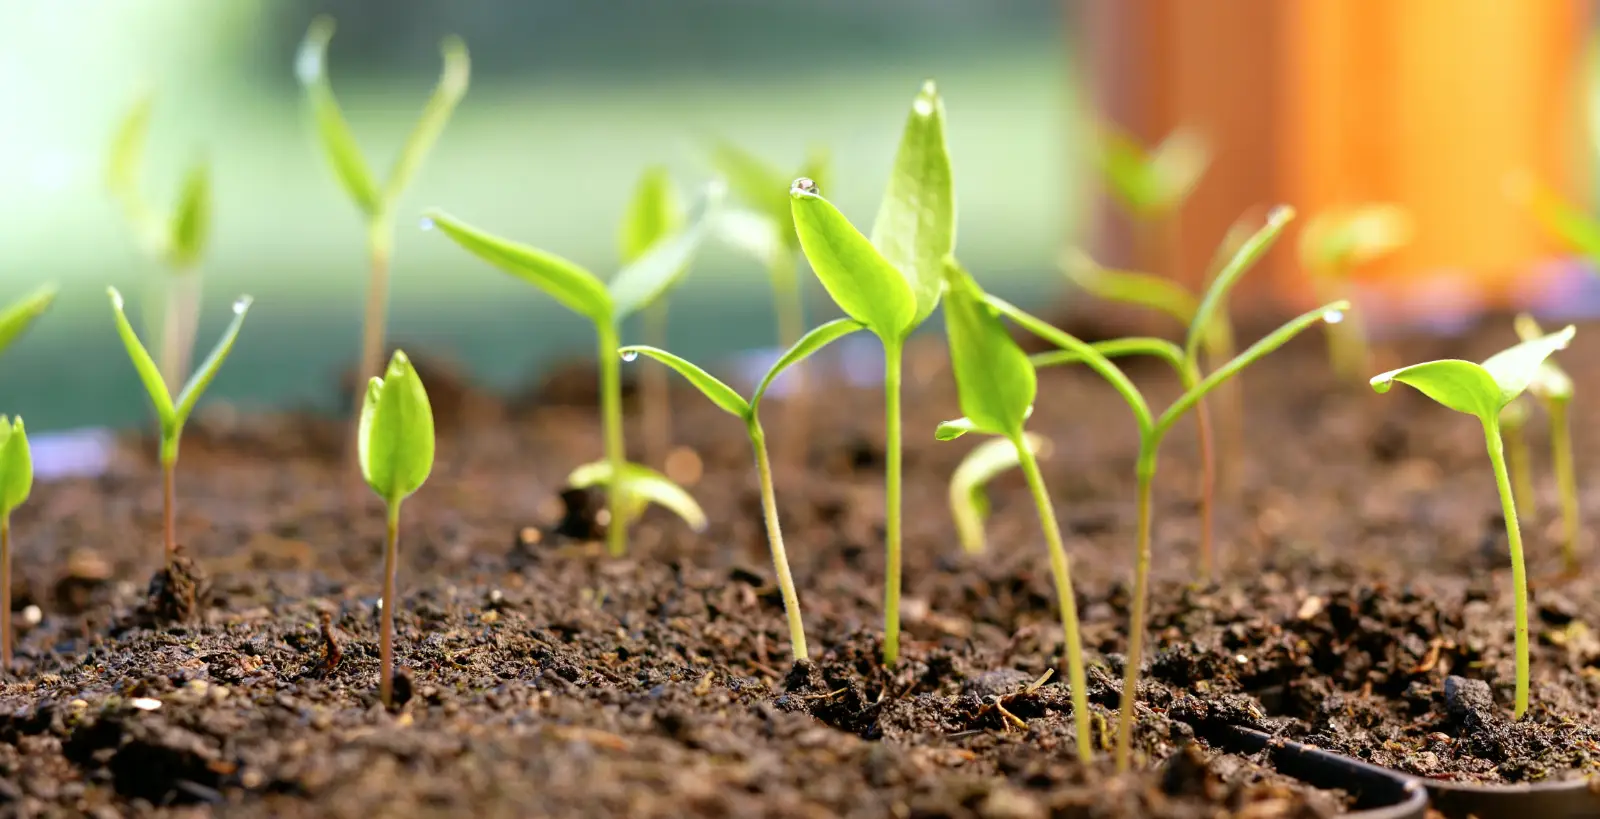 Chilli Pepper Seedlings sprouted. Learn how to Germinate Chilli Pepper Seeds Like a Pro!